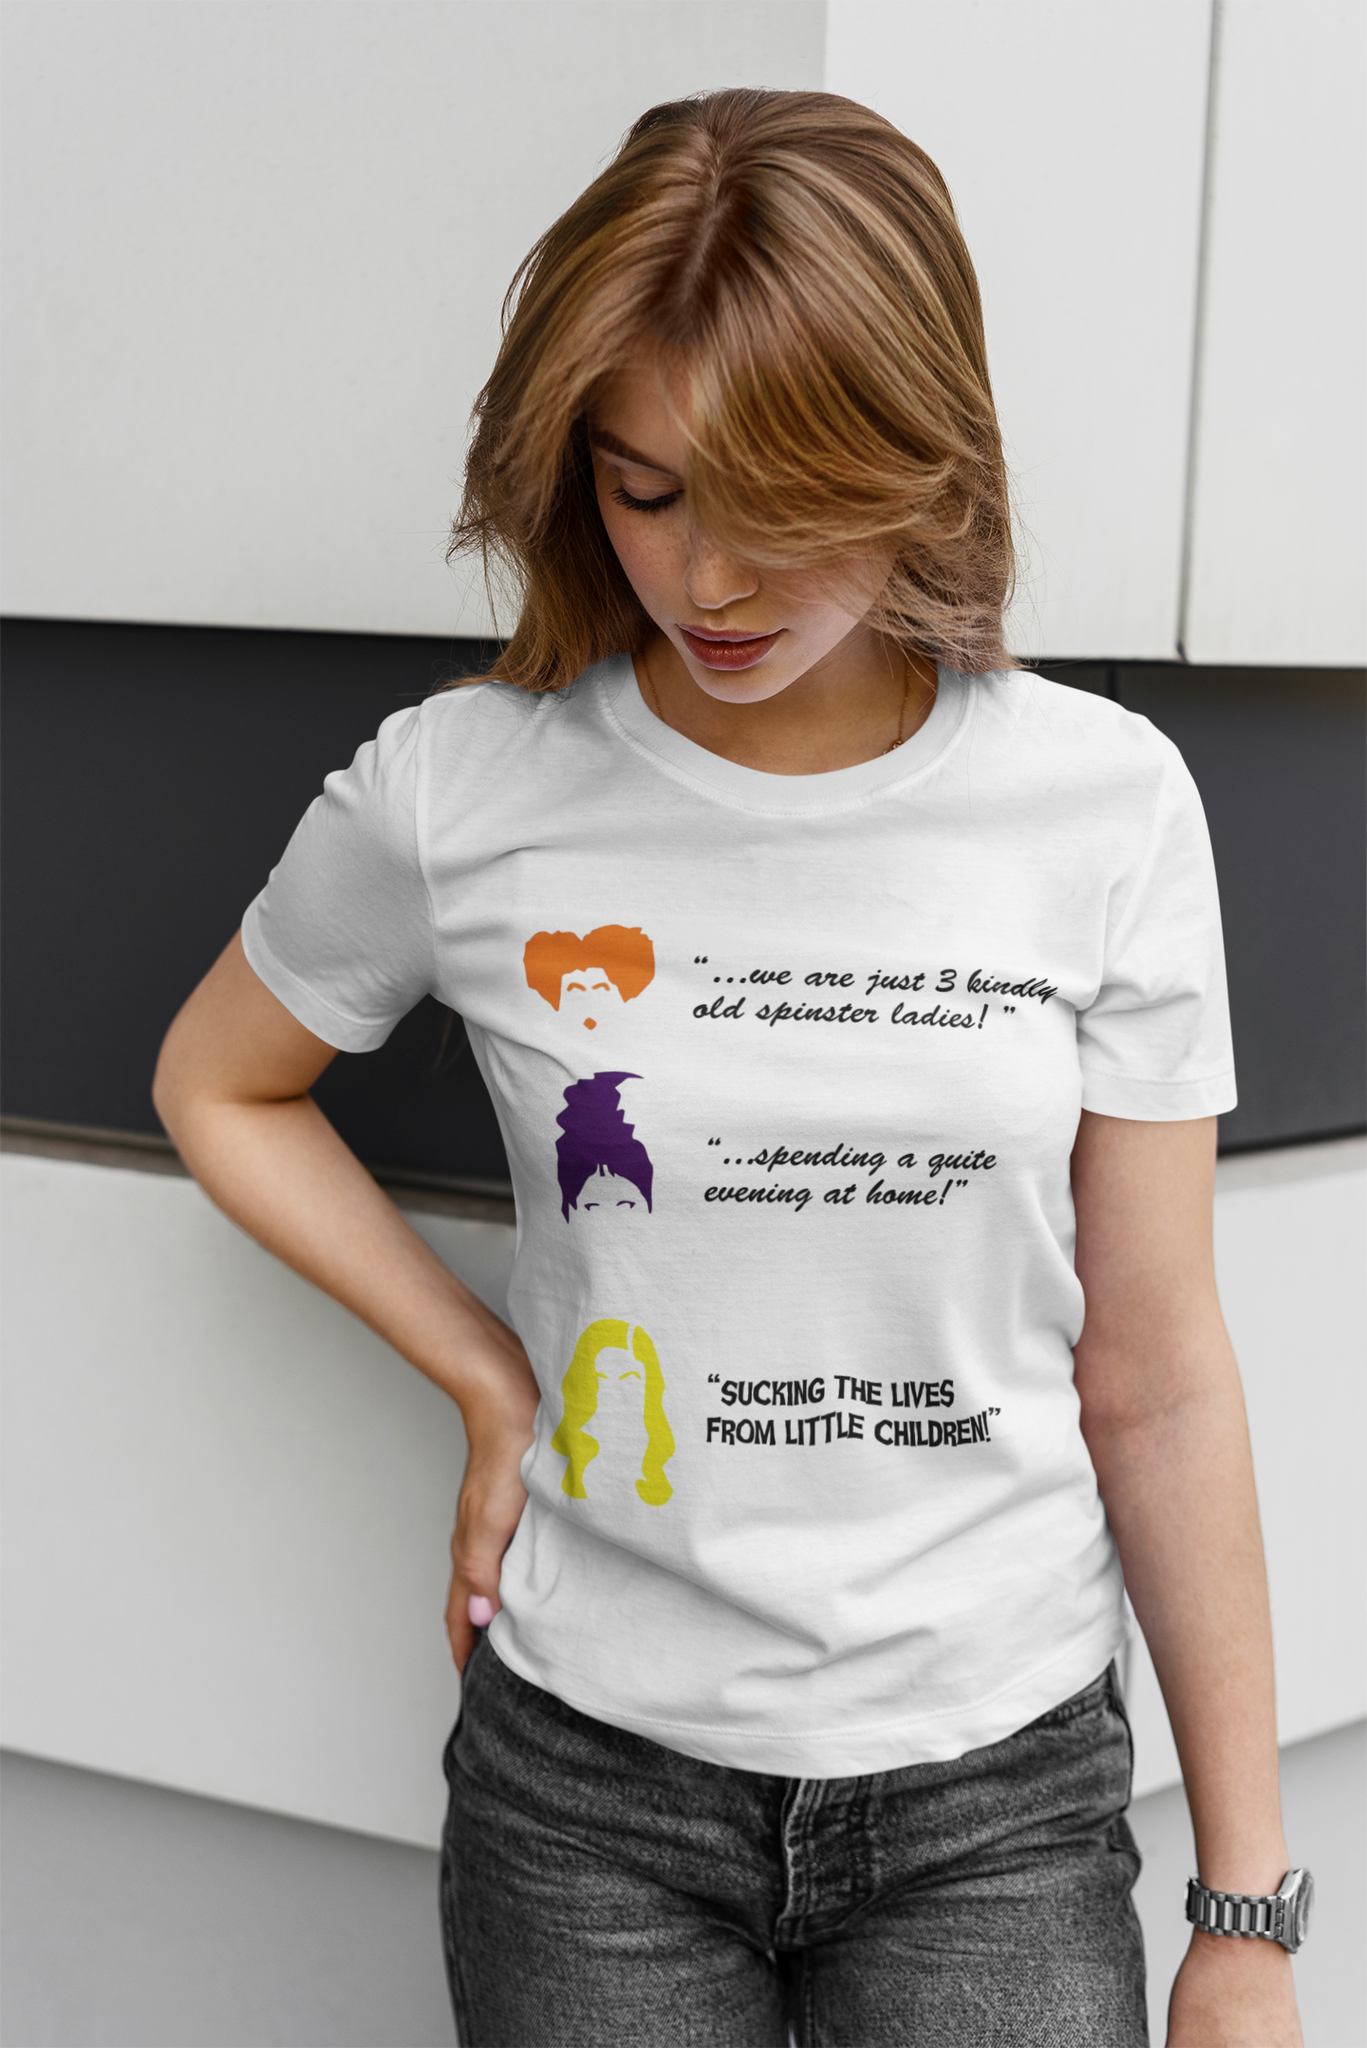 Hocus Pocus Tshirt, We Are Just 3 Kindly Old Spinster Ladies Shirt, Sanderson Sisters Quote T Shirt, Halloween Gifts